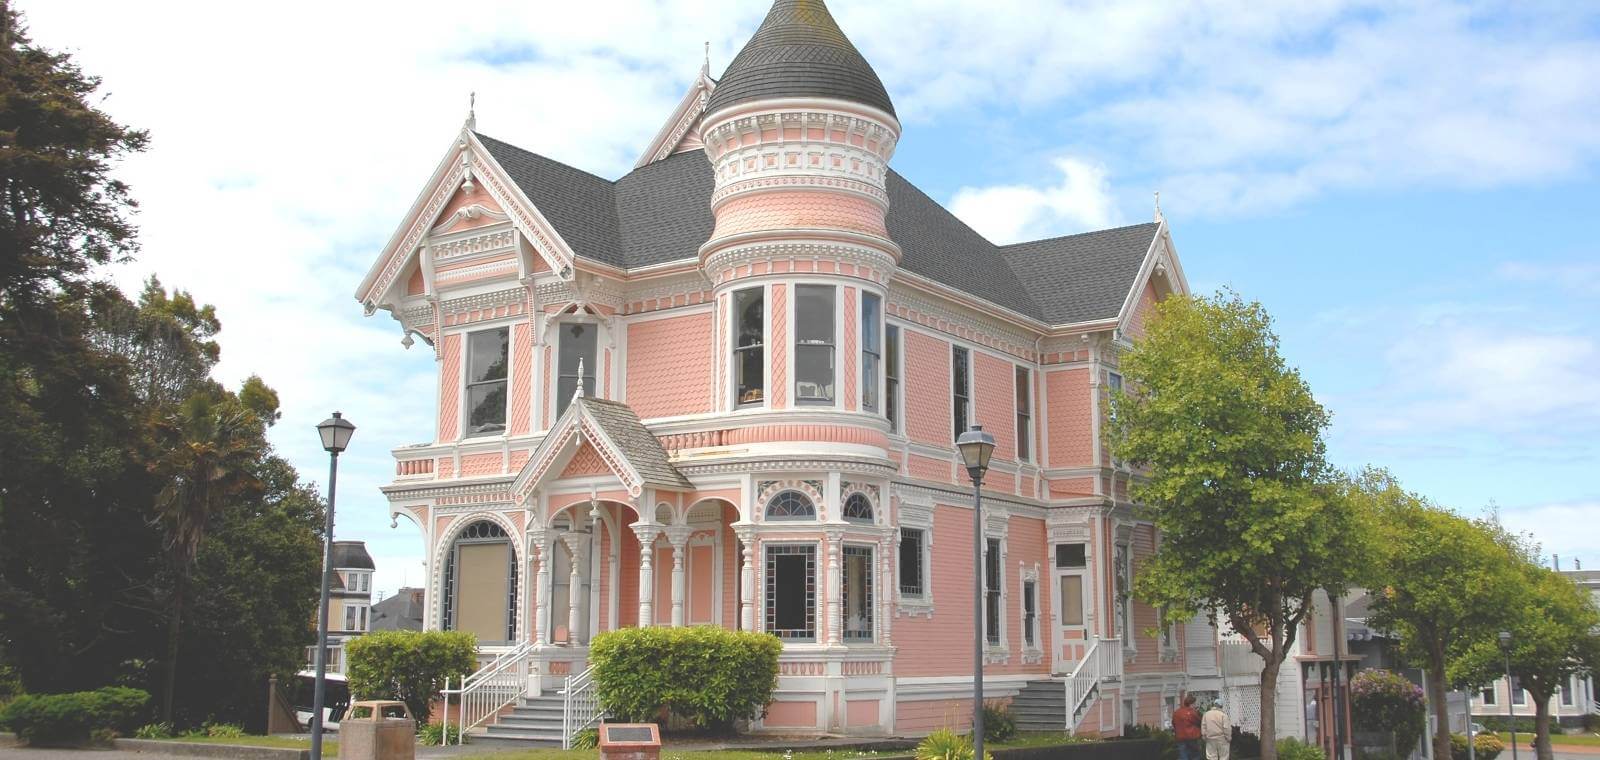 You’ll find a variety of different Victorian Queen Anne homes for sale in the Phoenix metro area. While they are more rare compared to other architectural types, there are many well-maintained examples across the Valley.